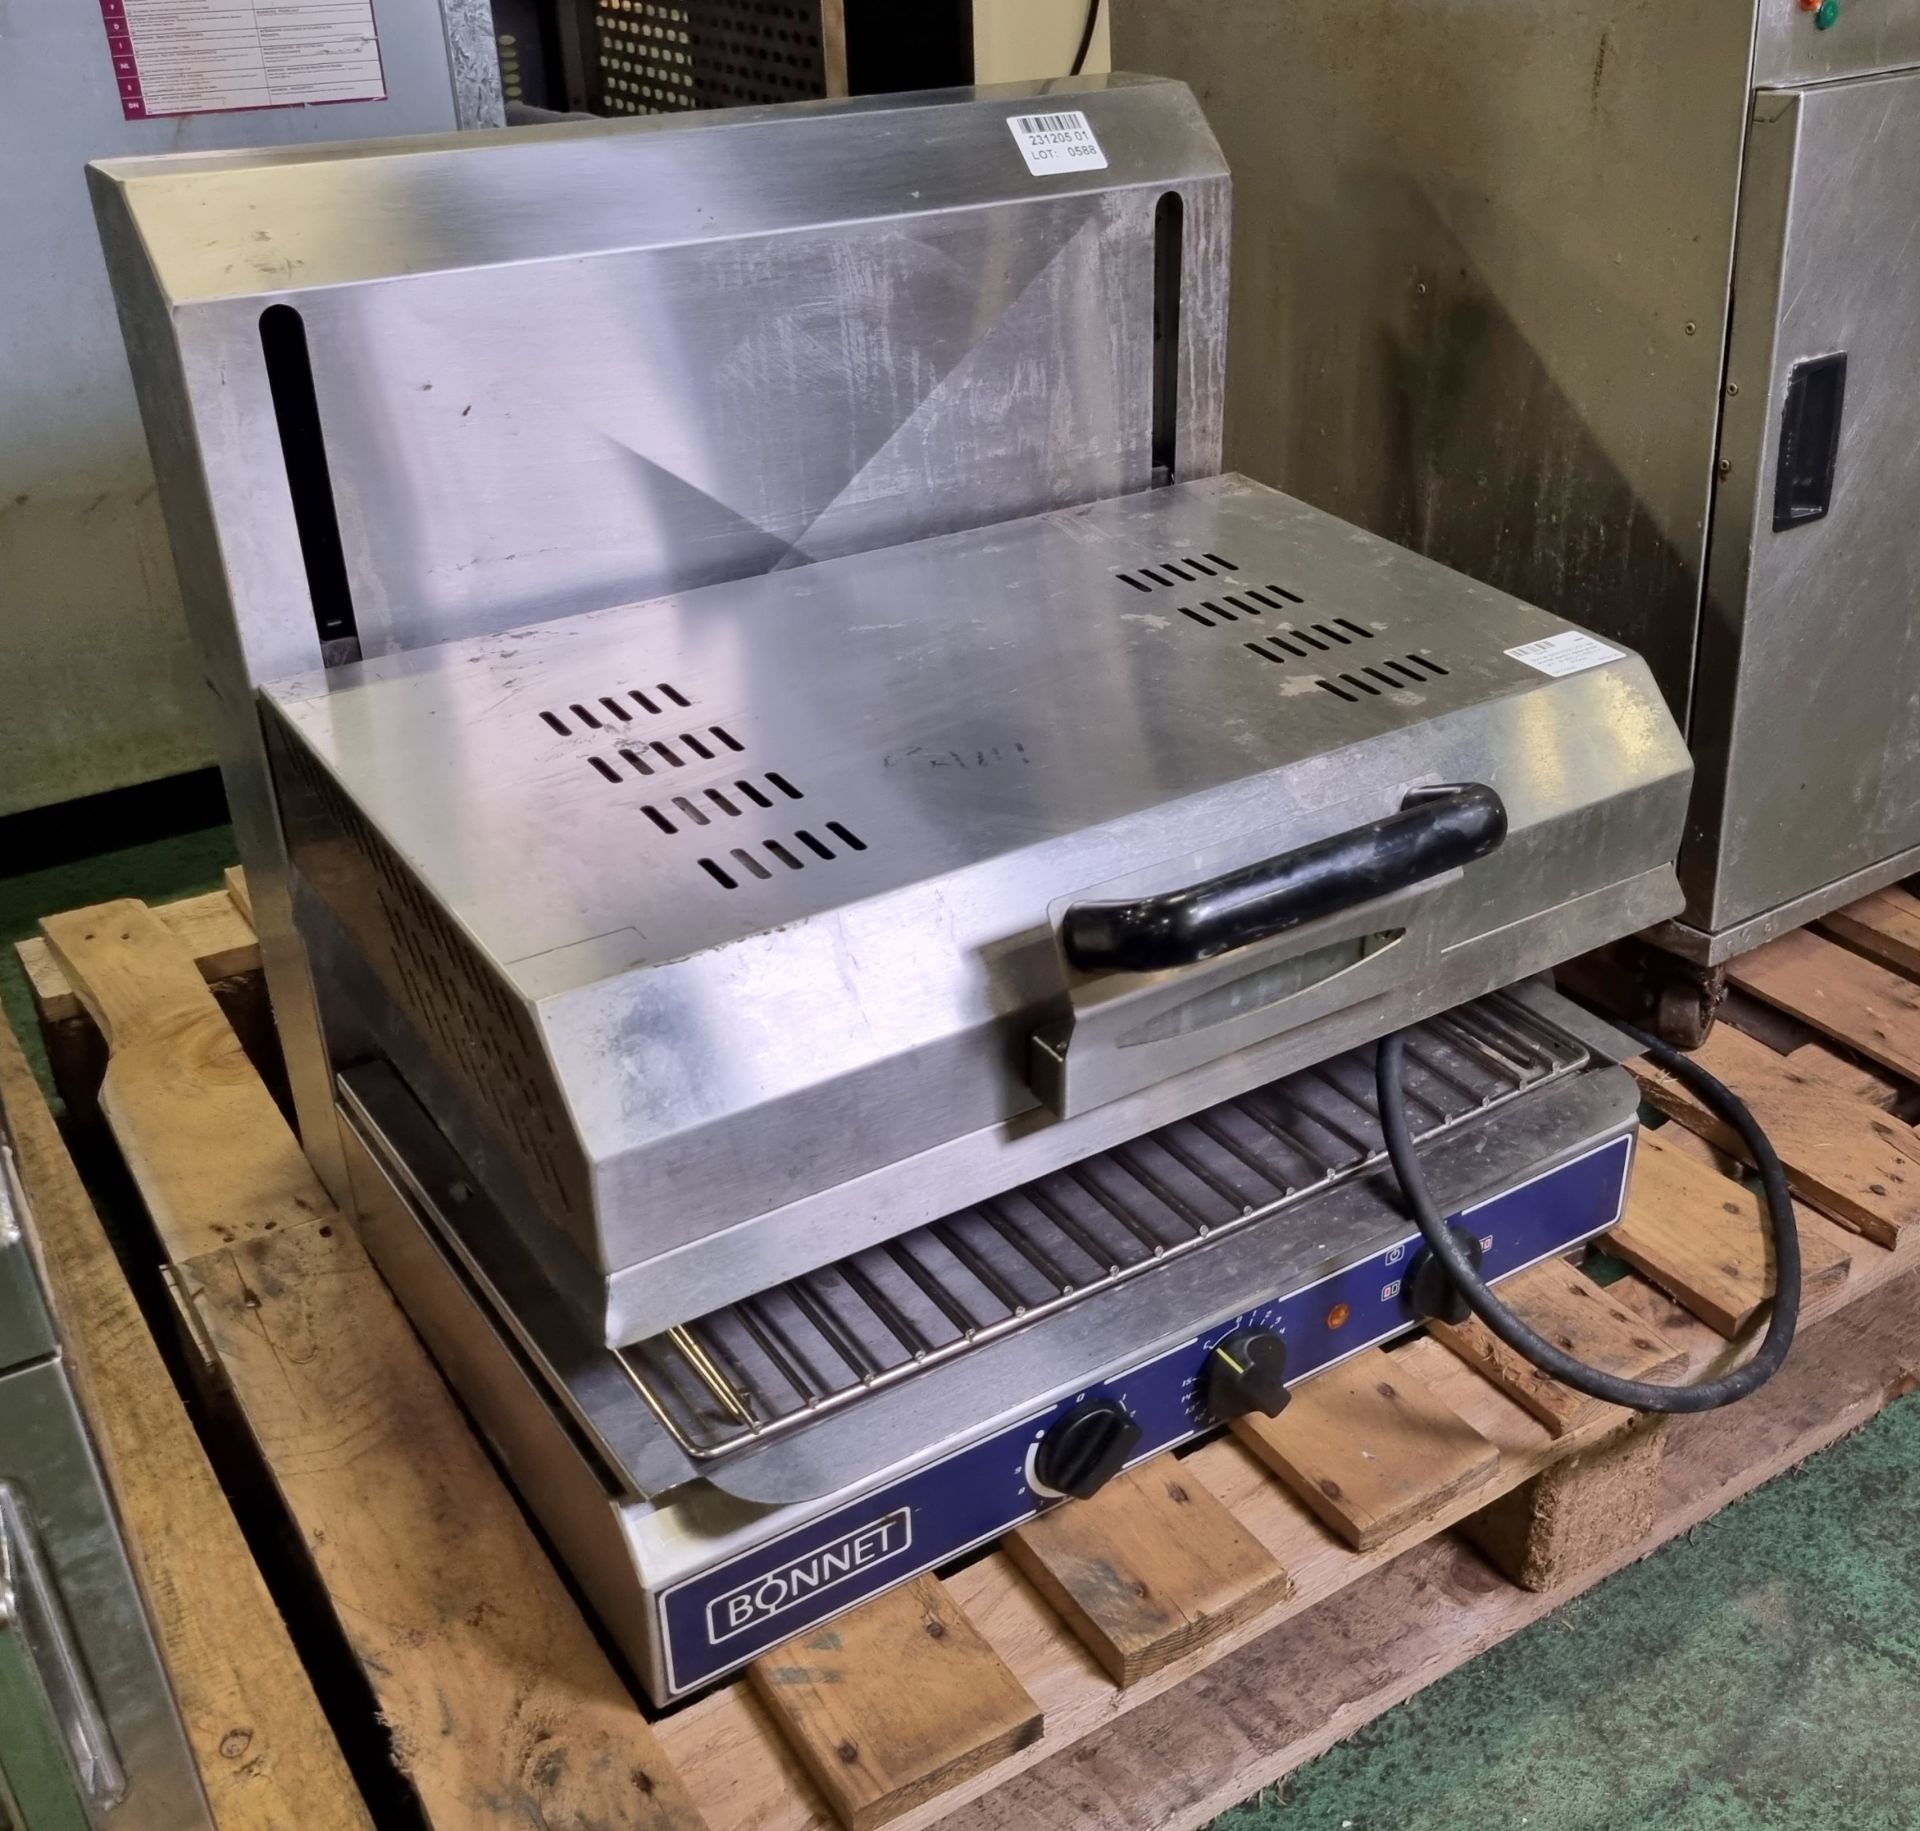 Bonnet SEM 5000 VCT rise and fall electric salamander grill - W 600 x D 650 x H 600mm - Image 2 of 4